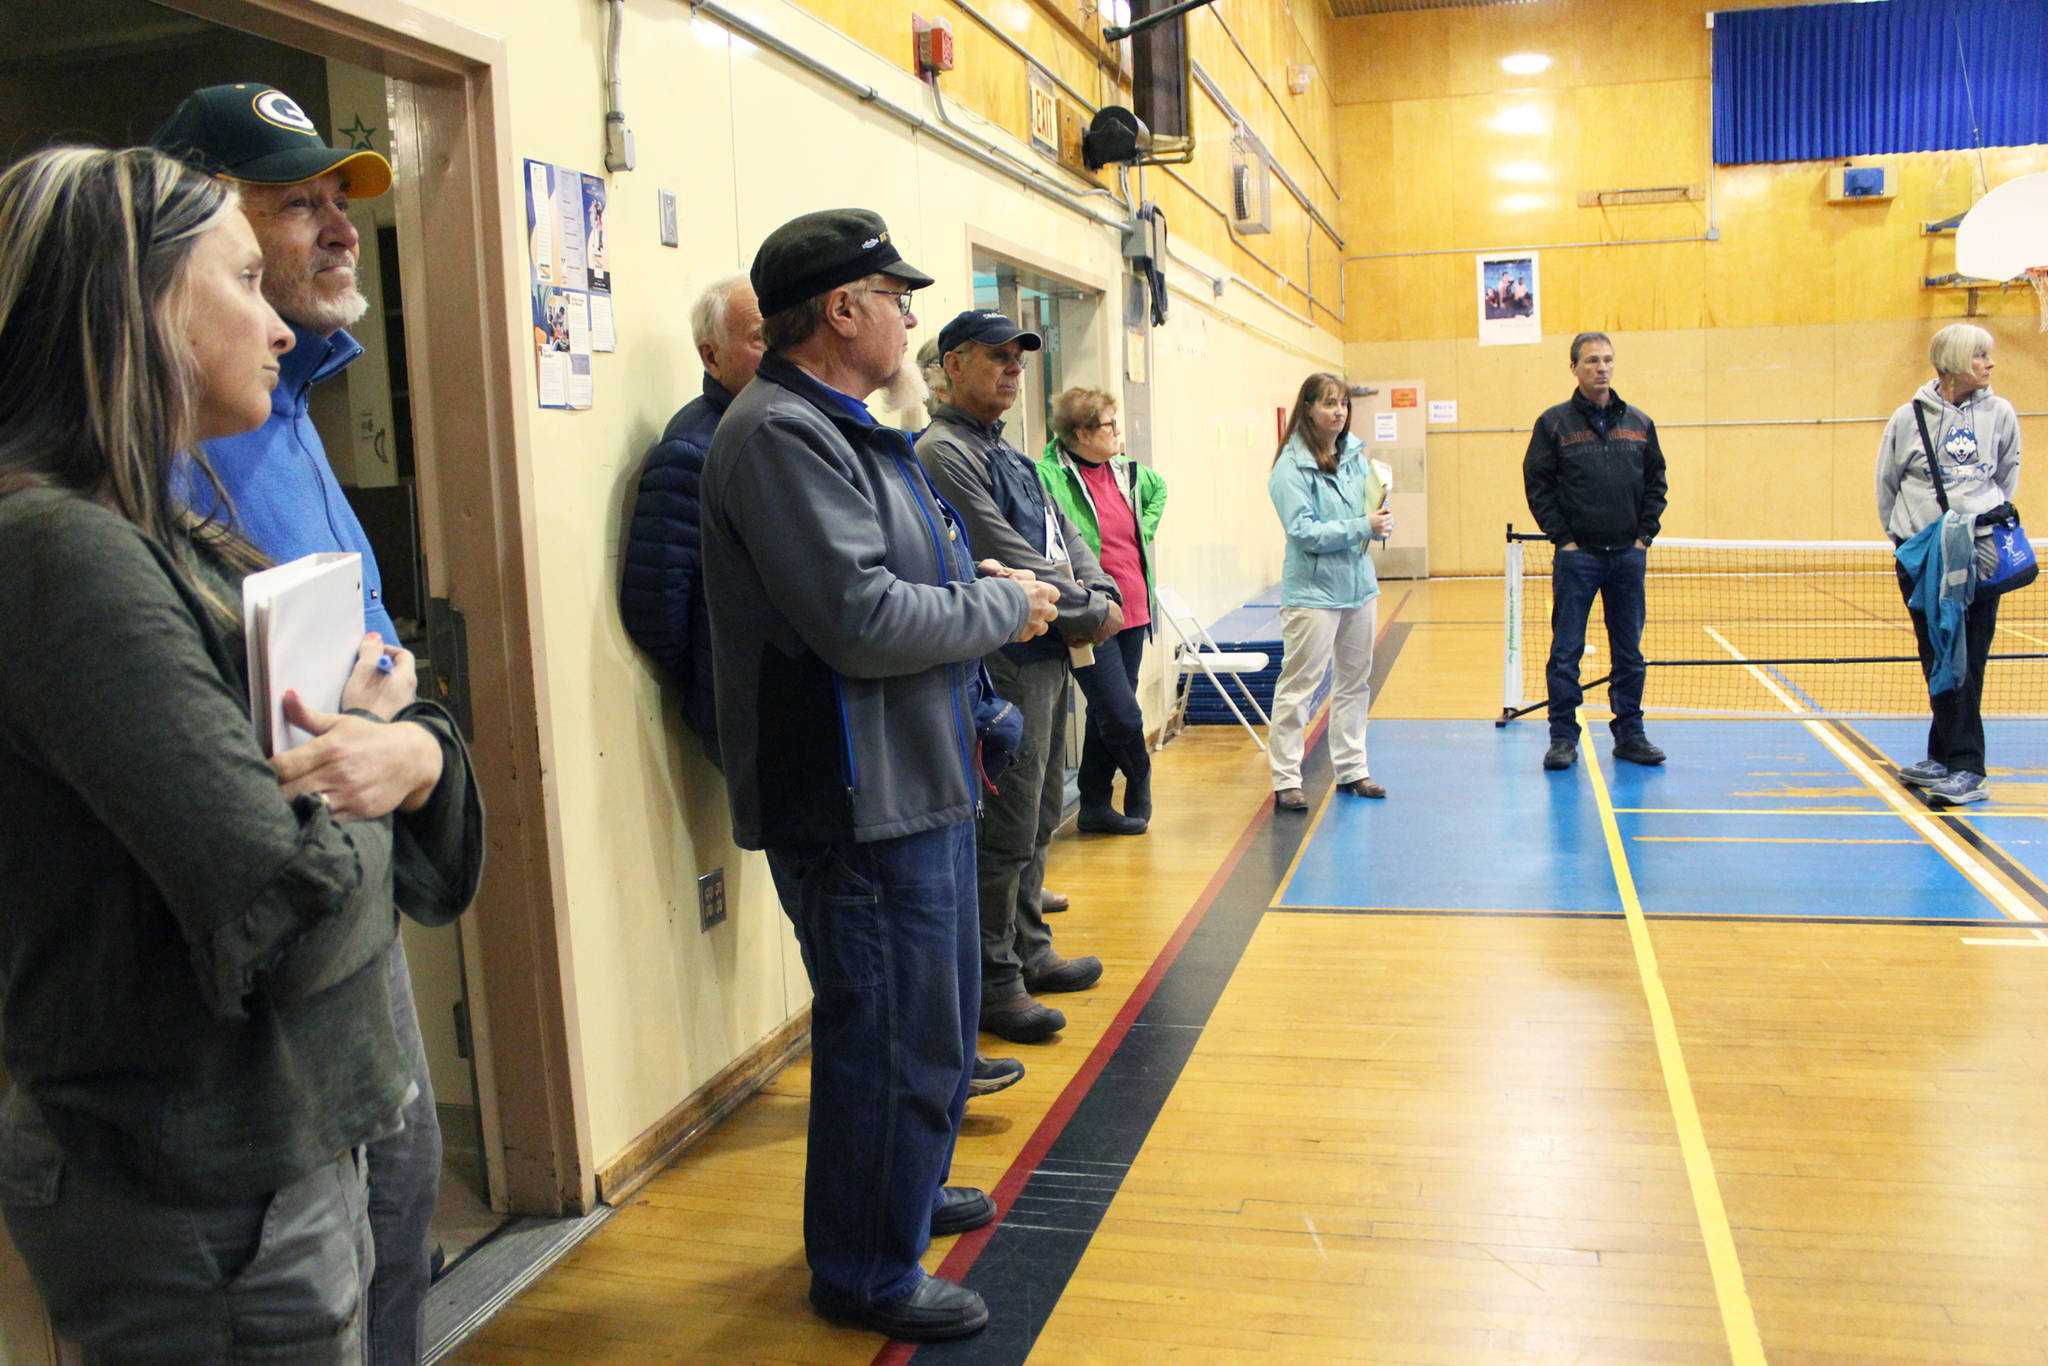 Members of the HERC Task Force and the public, located in the gym currently used for community recreation, listen to city staff talk about the state of the building during a walk-through Tuesday, June 26, 2018 in Homer, Alaska. (Photo by Megan Pacer/Homer News)